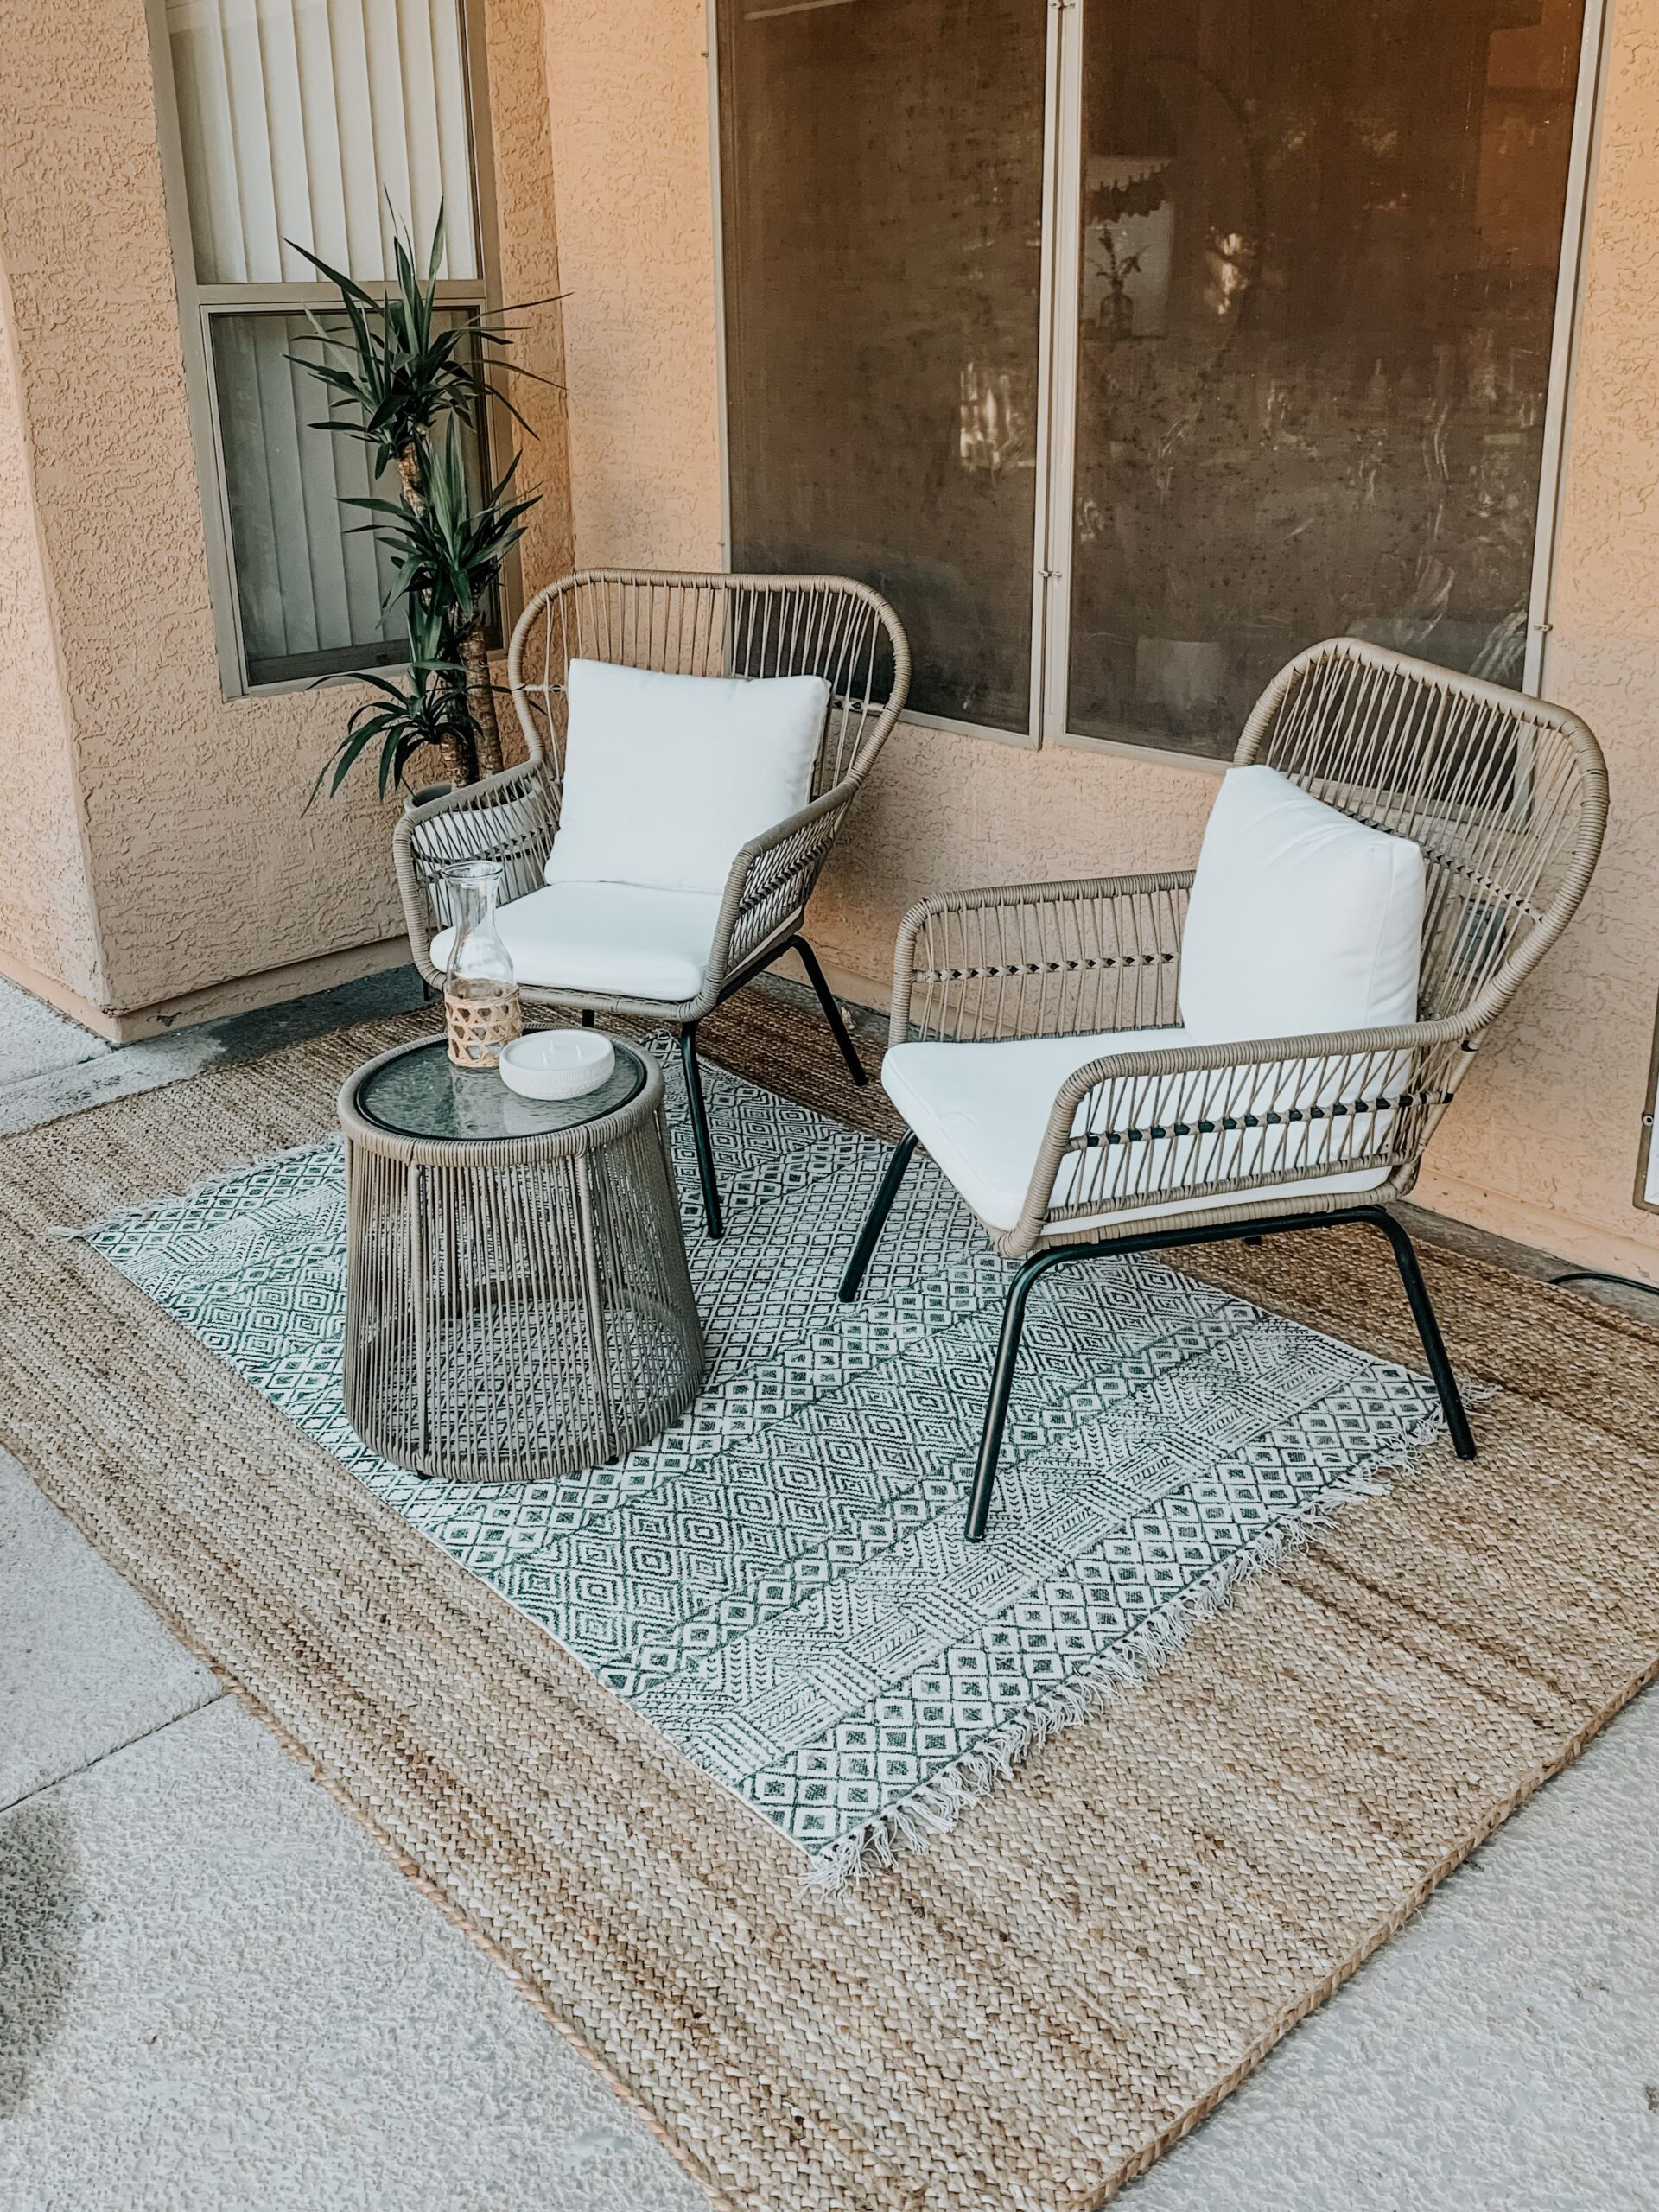 Make use of the bistro patio set to have
comfort look